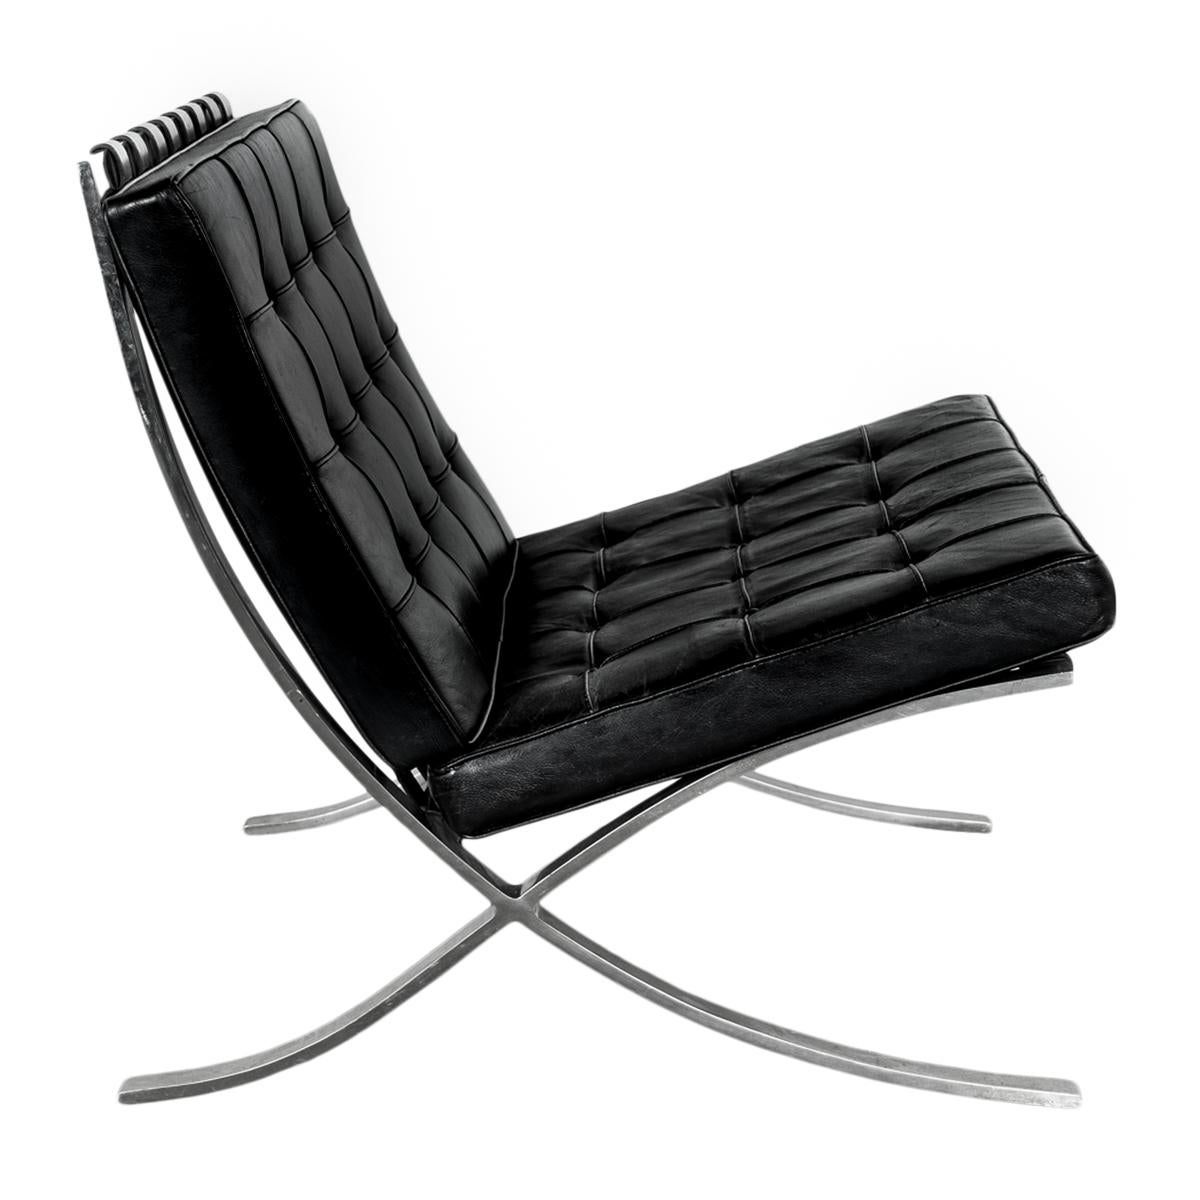 Early Pair MCM Knoll Barcelona Chairs Black Leather Mies van der Rohe 1961 For Sale 4